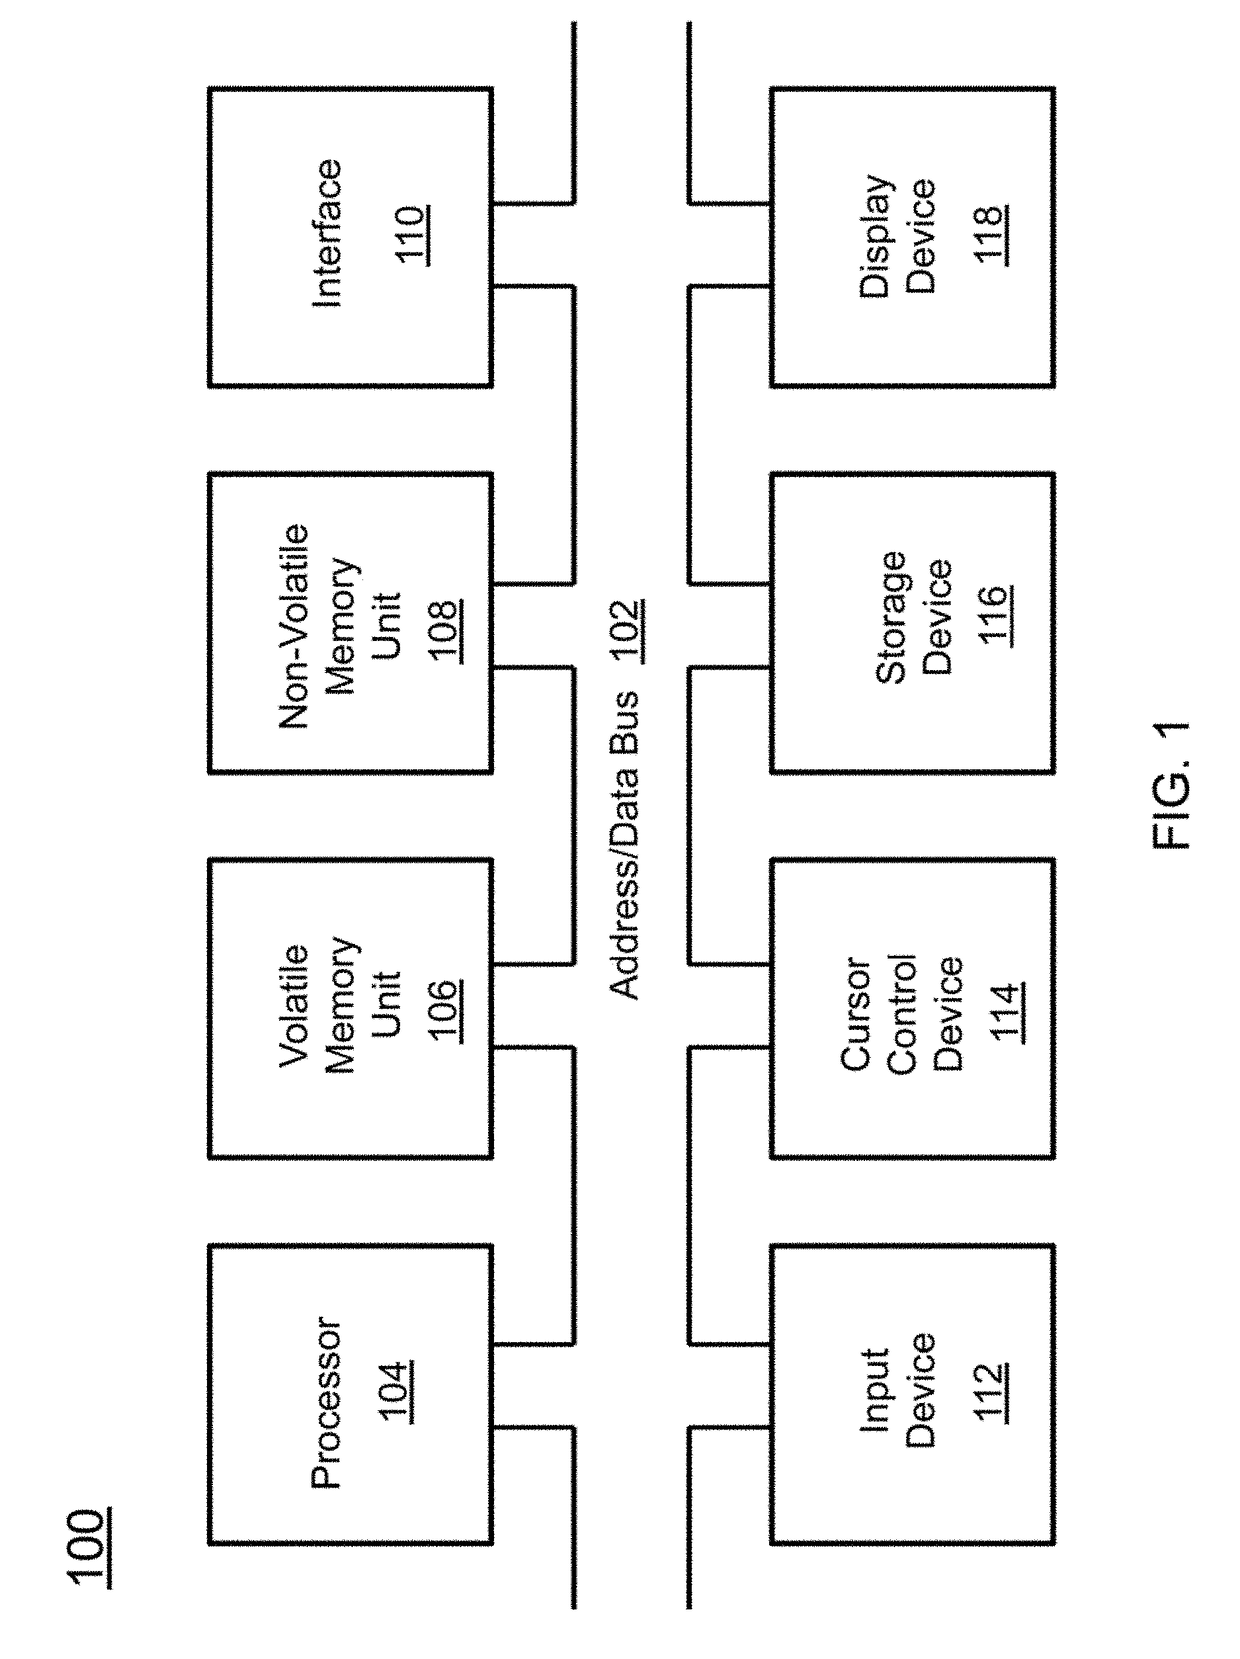 Machine-vision method to classify input data based on object components